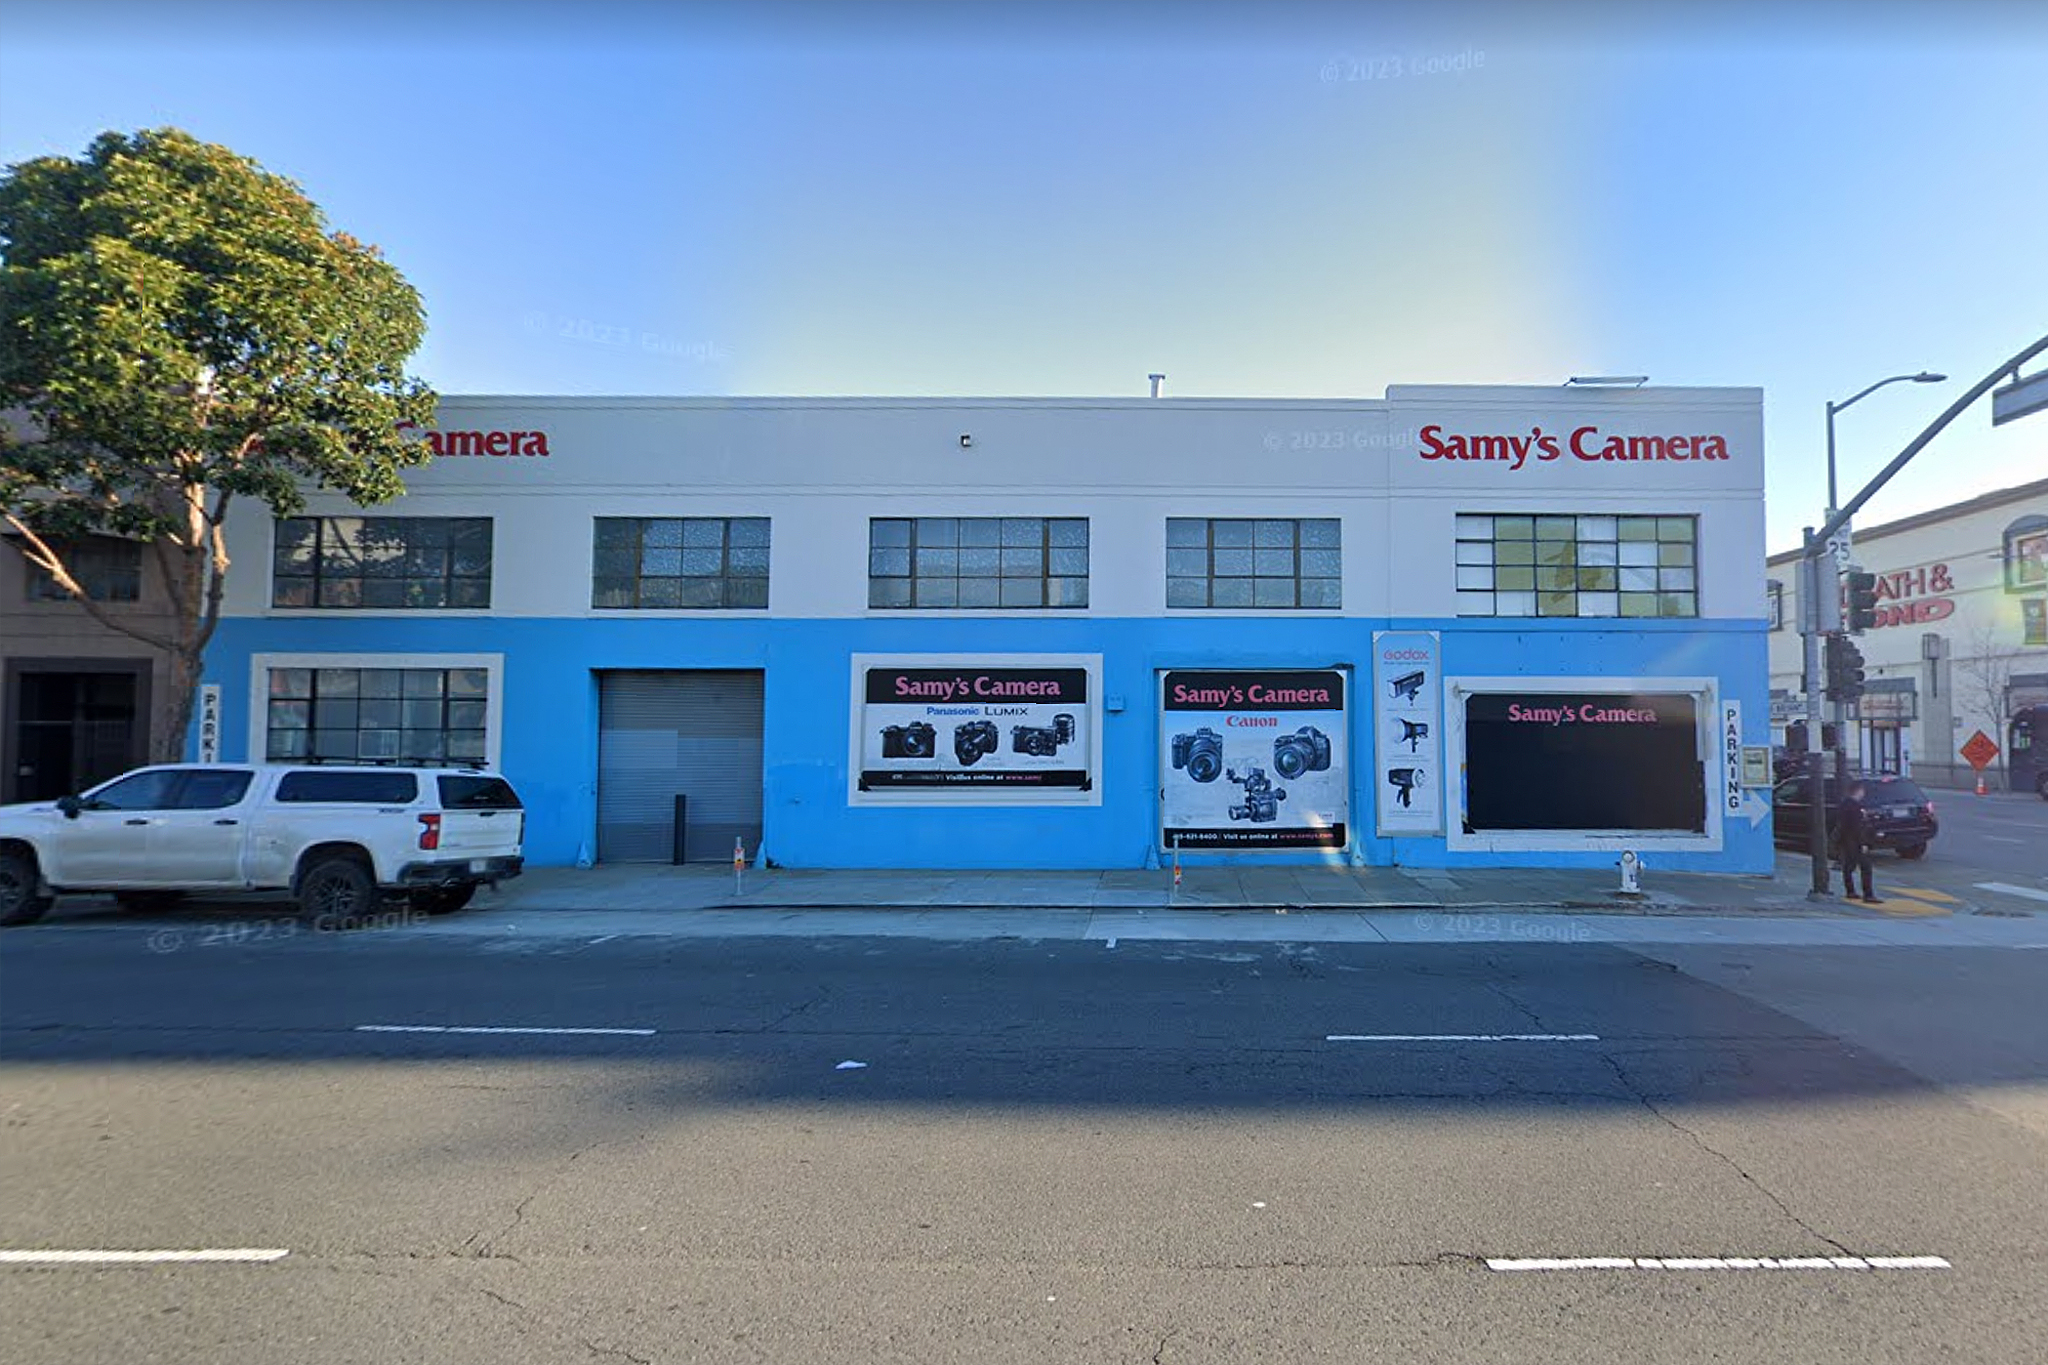 Samy’s Digital camera closes completely after 10 years in San Francisco